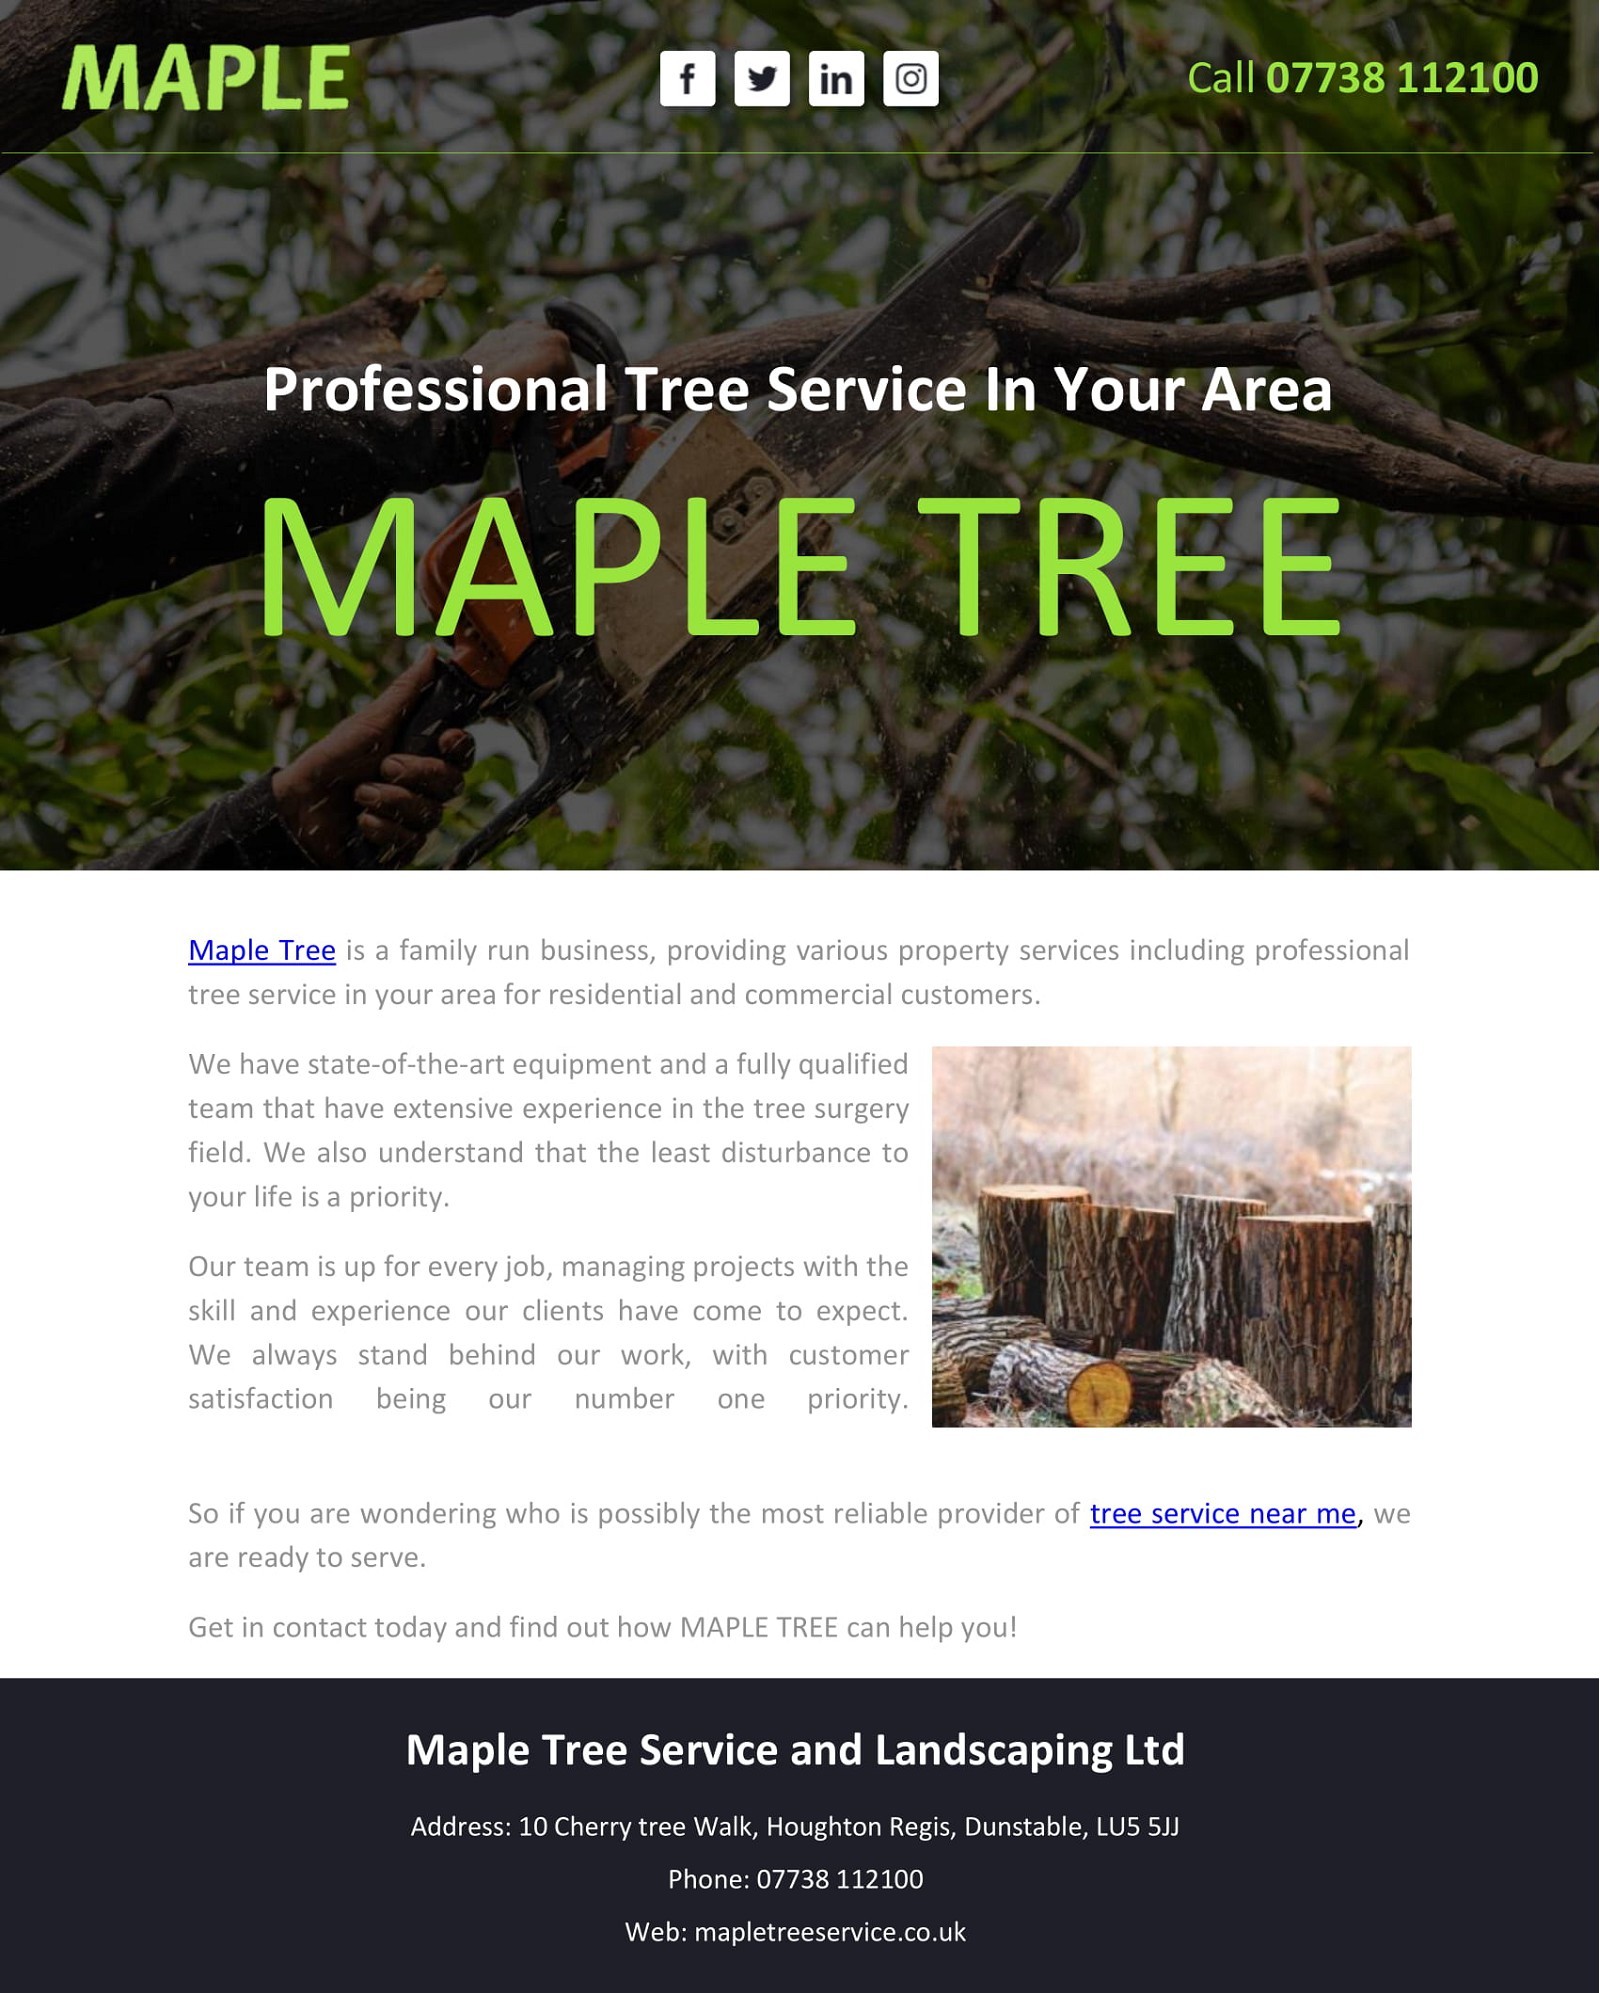 Professional Tree Service In Your Area - MAPLE TREE